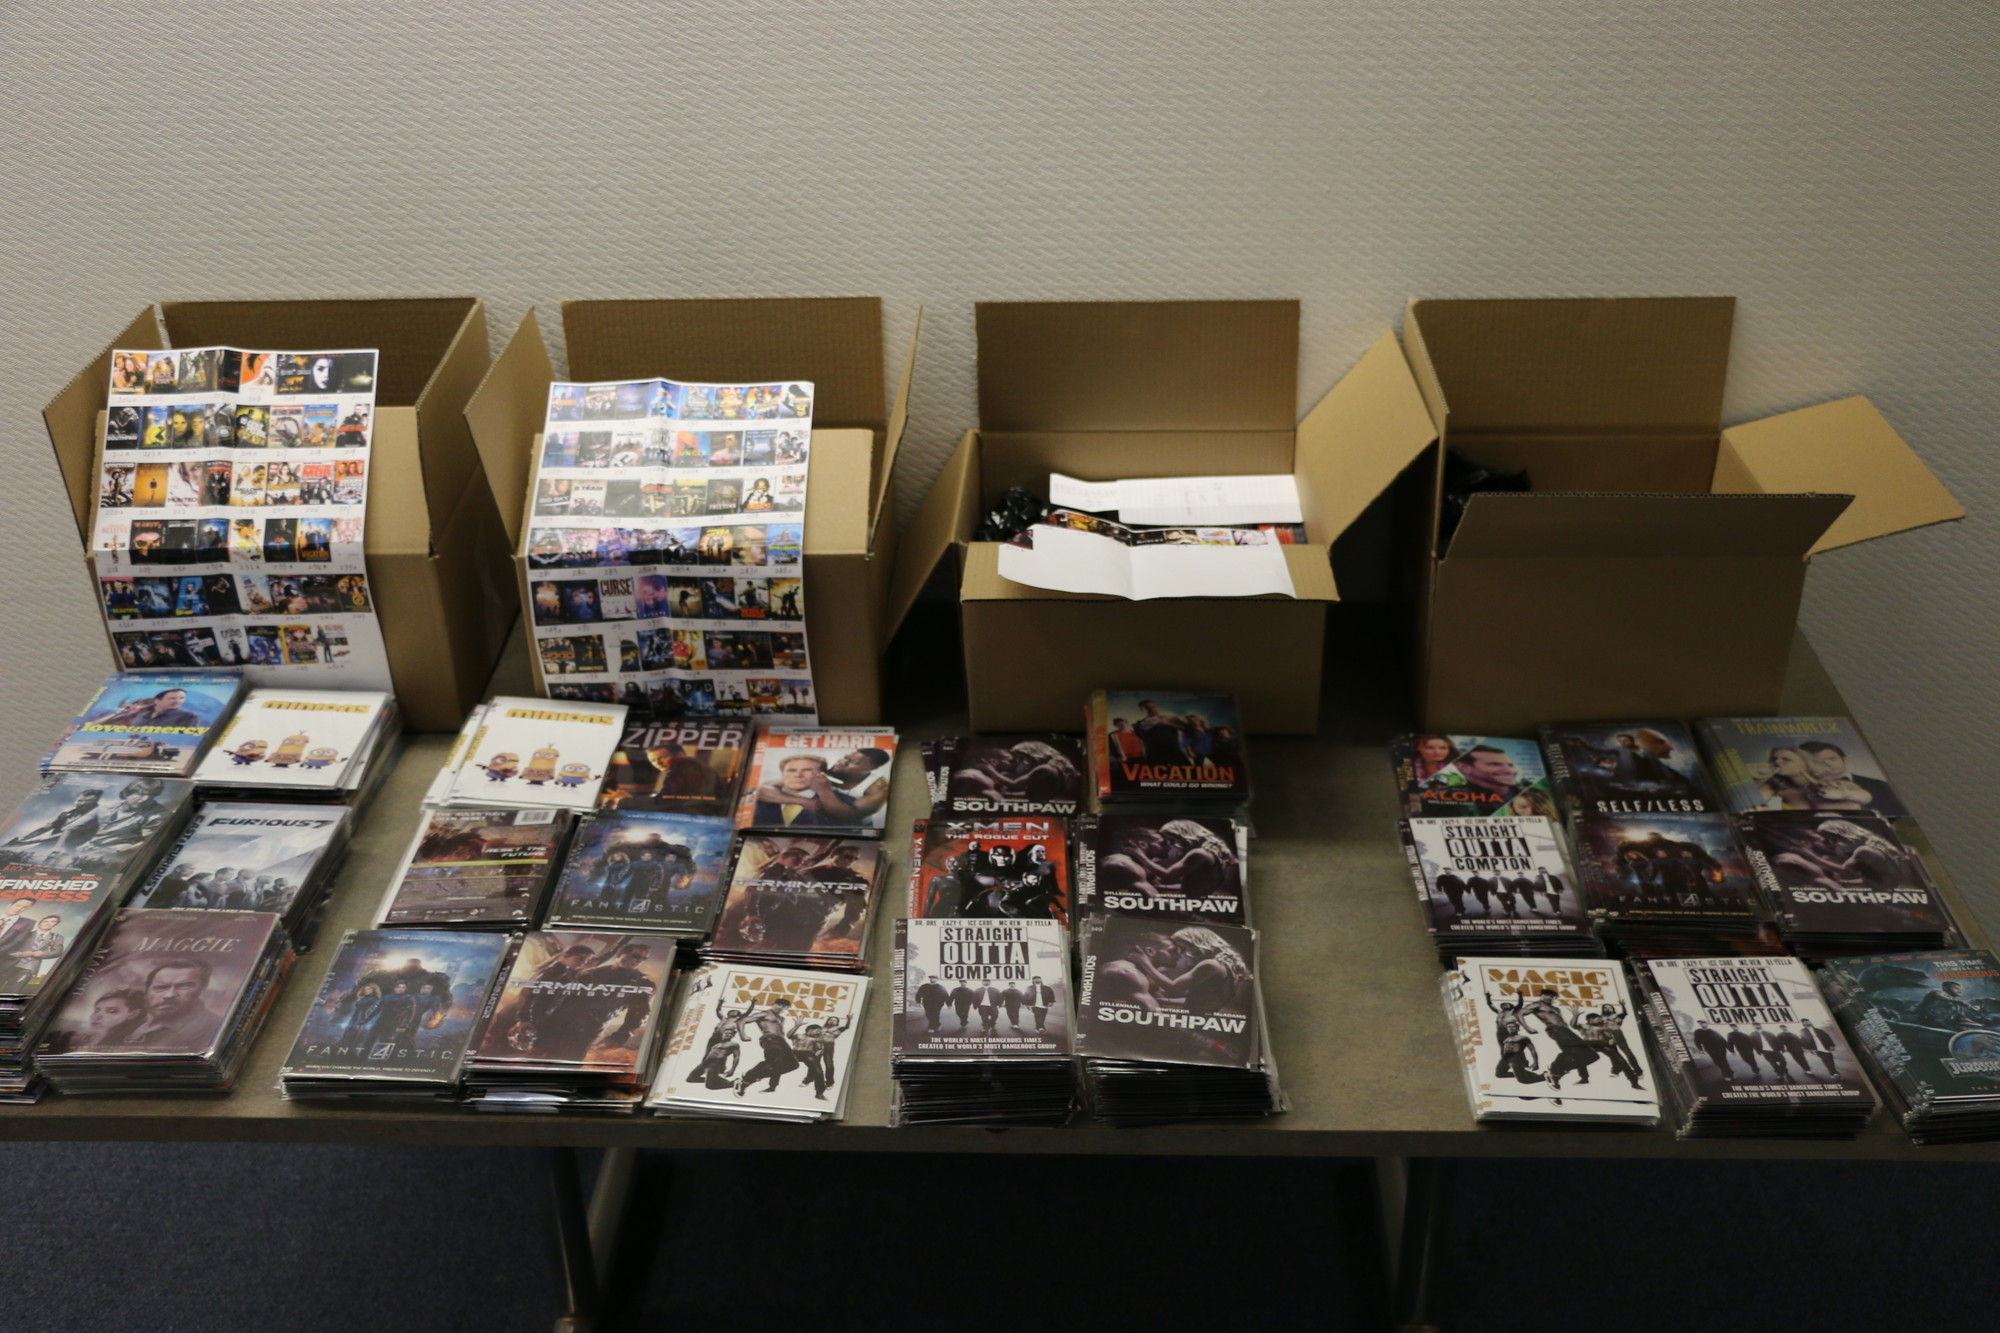 Investigators seized more than 1,500 DVDs from Wang and Zheng's Flushing home when the couple was arrested, according to Singas.